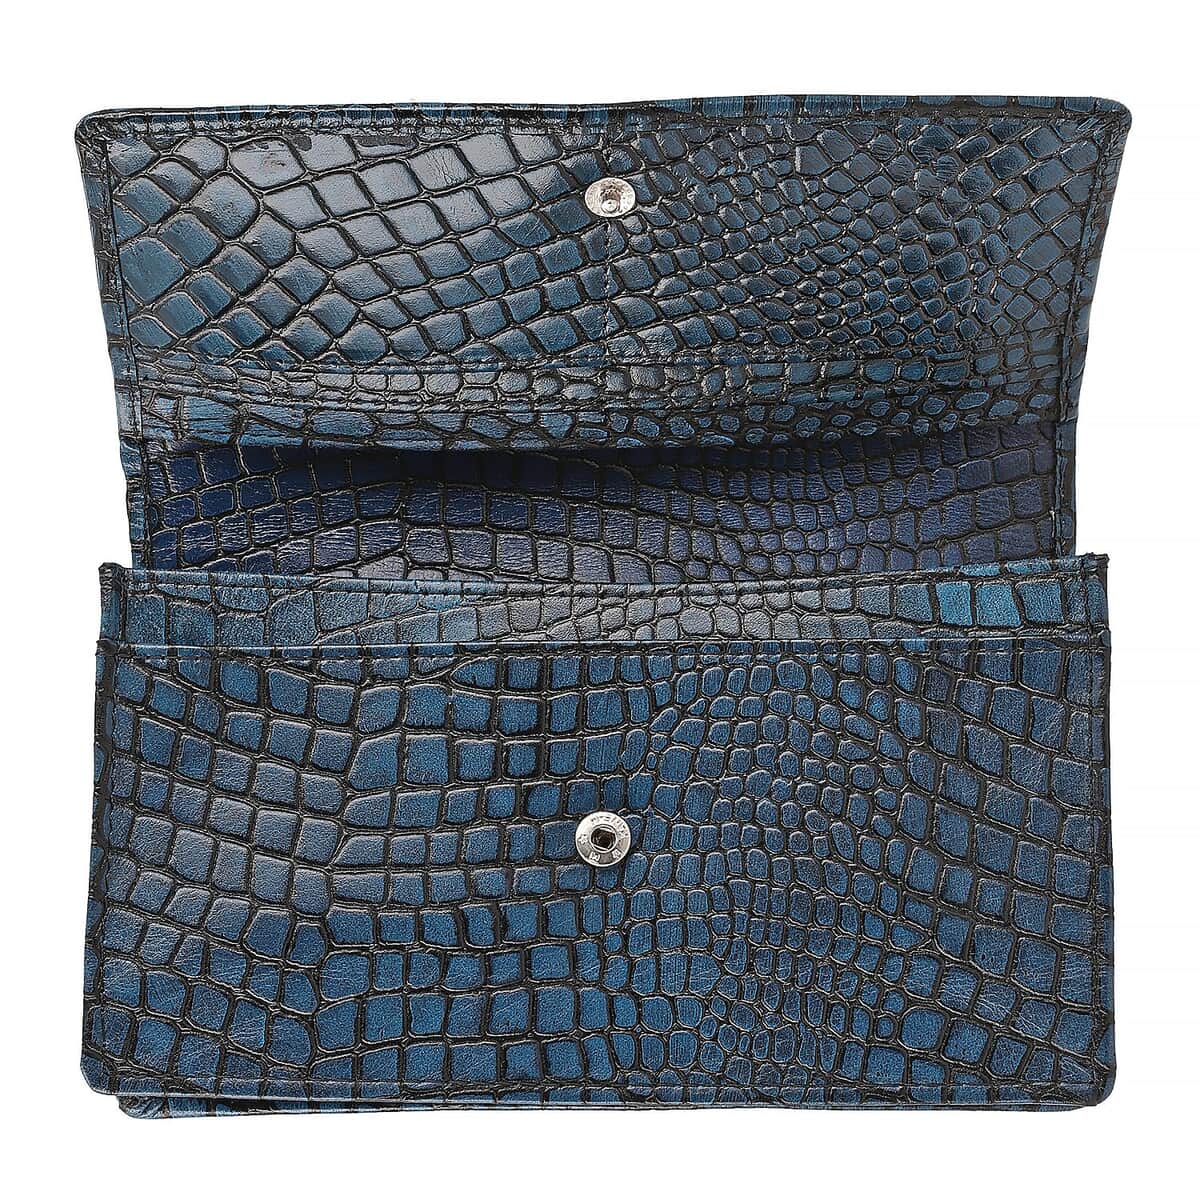 "Croco Embossed Genuine Leather Mobile Phone Wallet Size: 7.4(L)x1(W)x4.5(H) Inches Color: Turquoise" image number 5